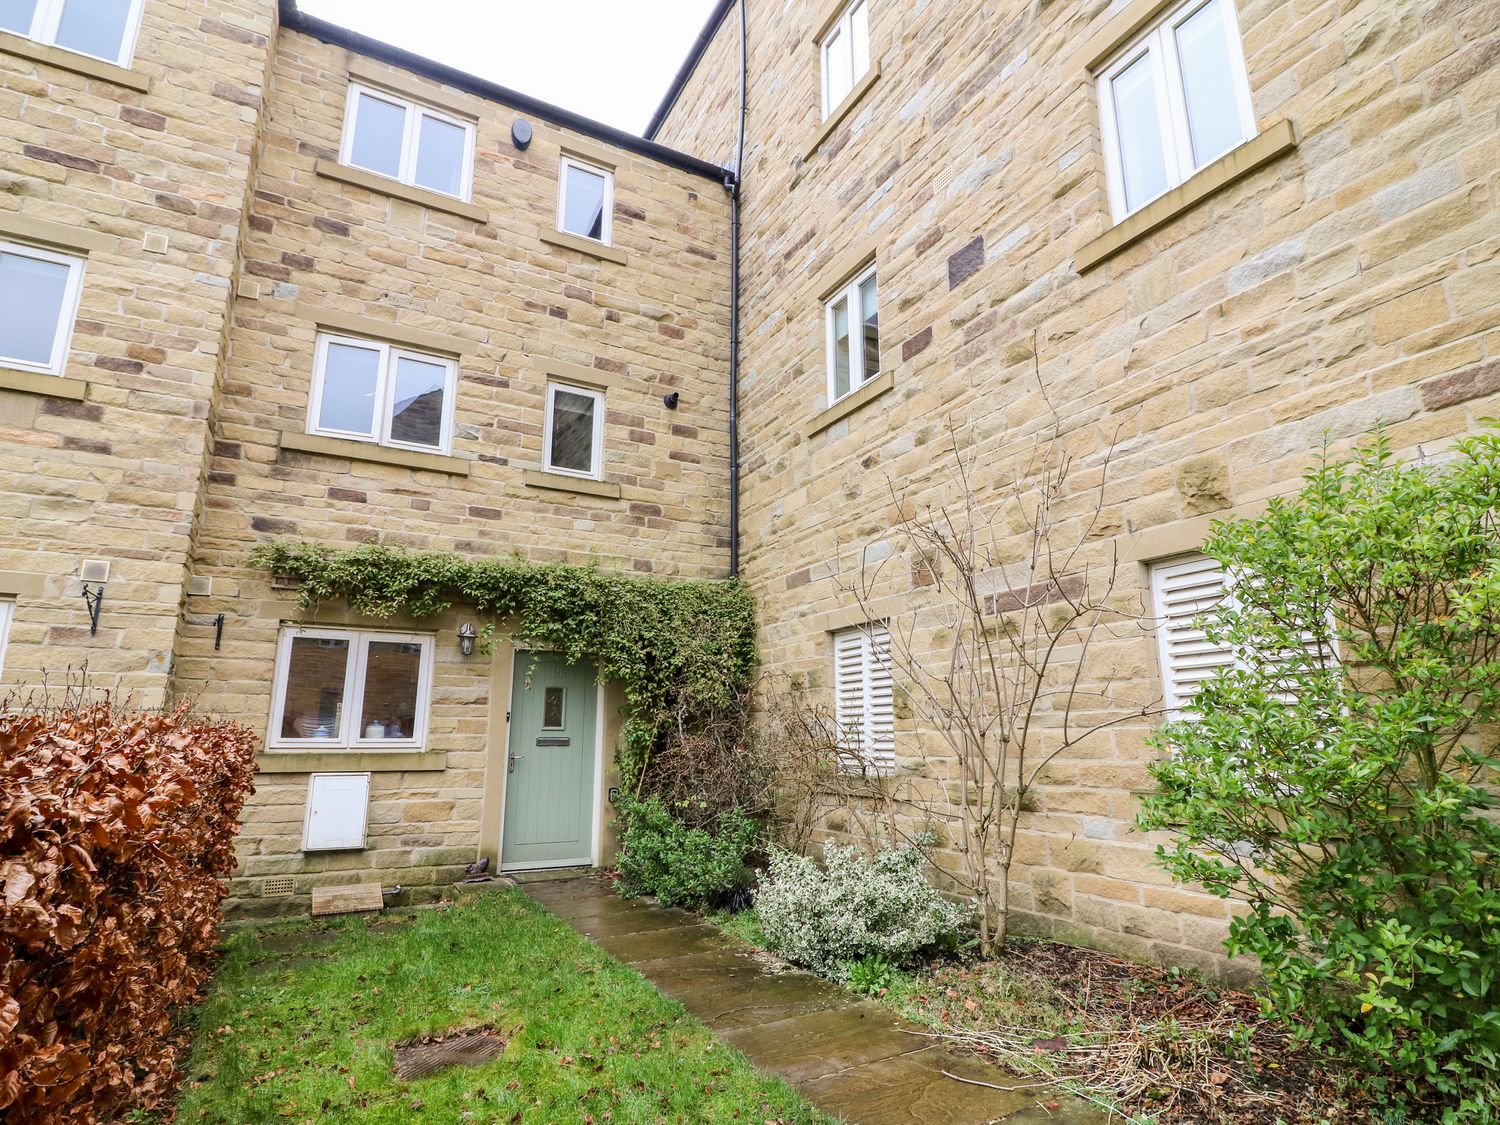 15 Tannery Lane - Yorkshire Dales - 966020 - photo 1